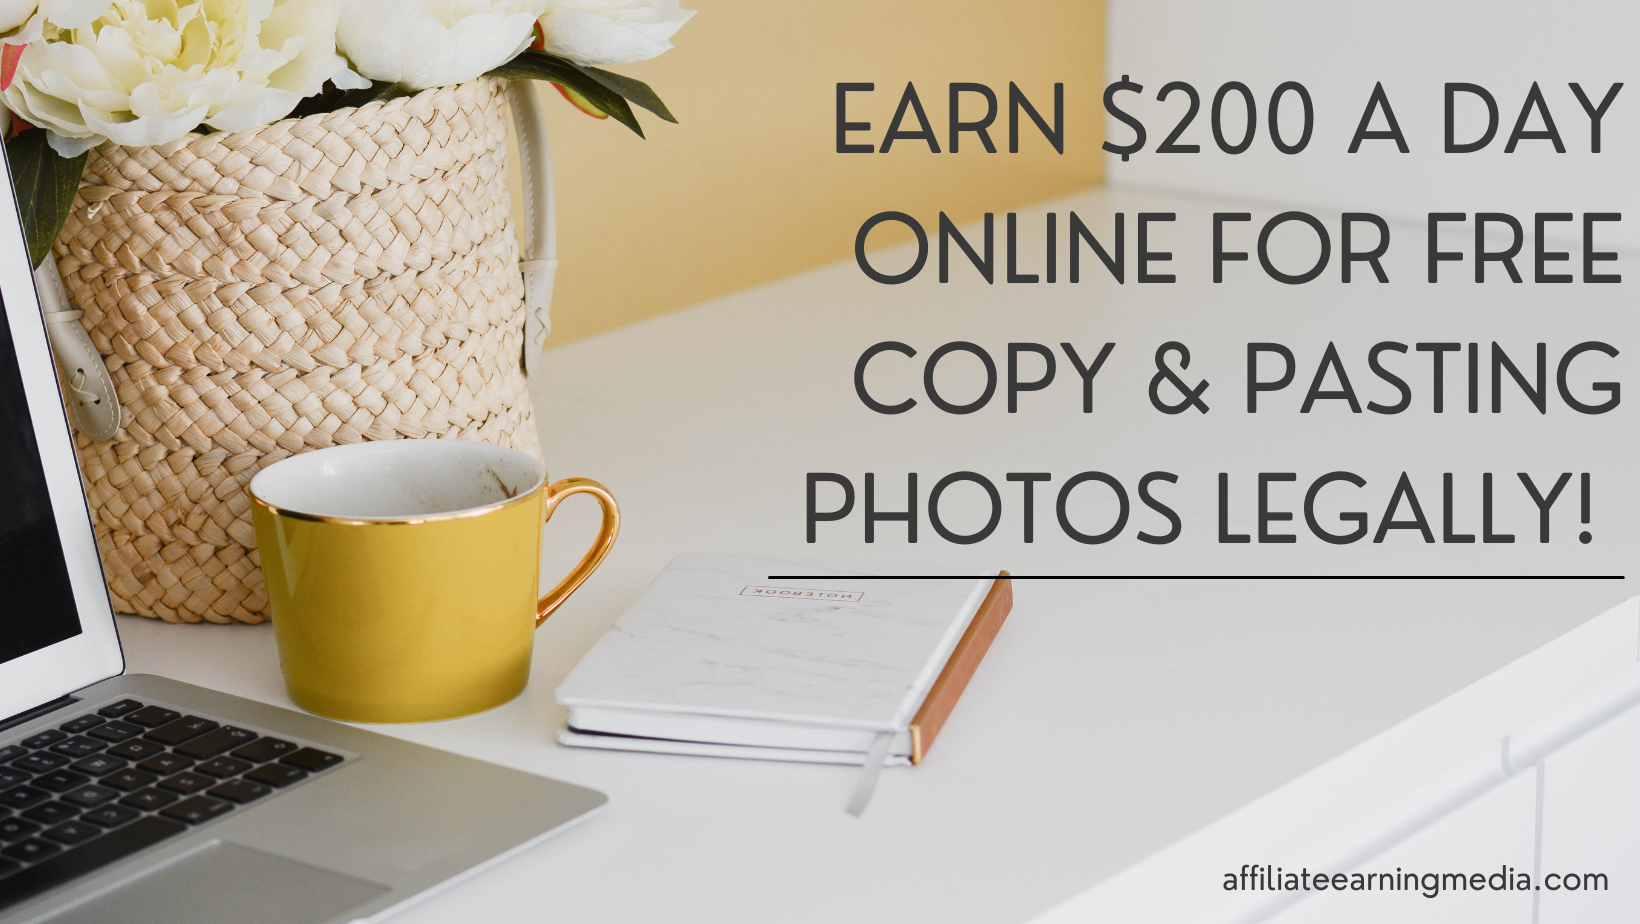 Earn $200 A DAY Online For FREE Copy & Pasting Photos Legally!